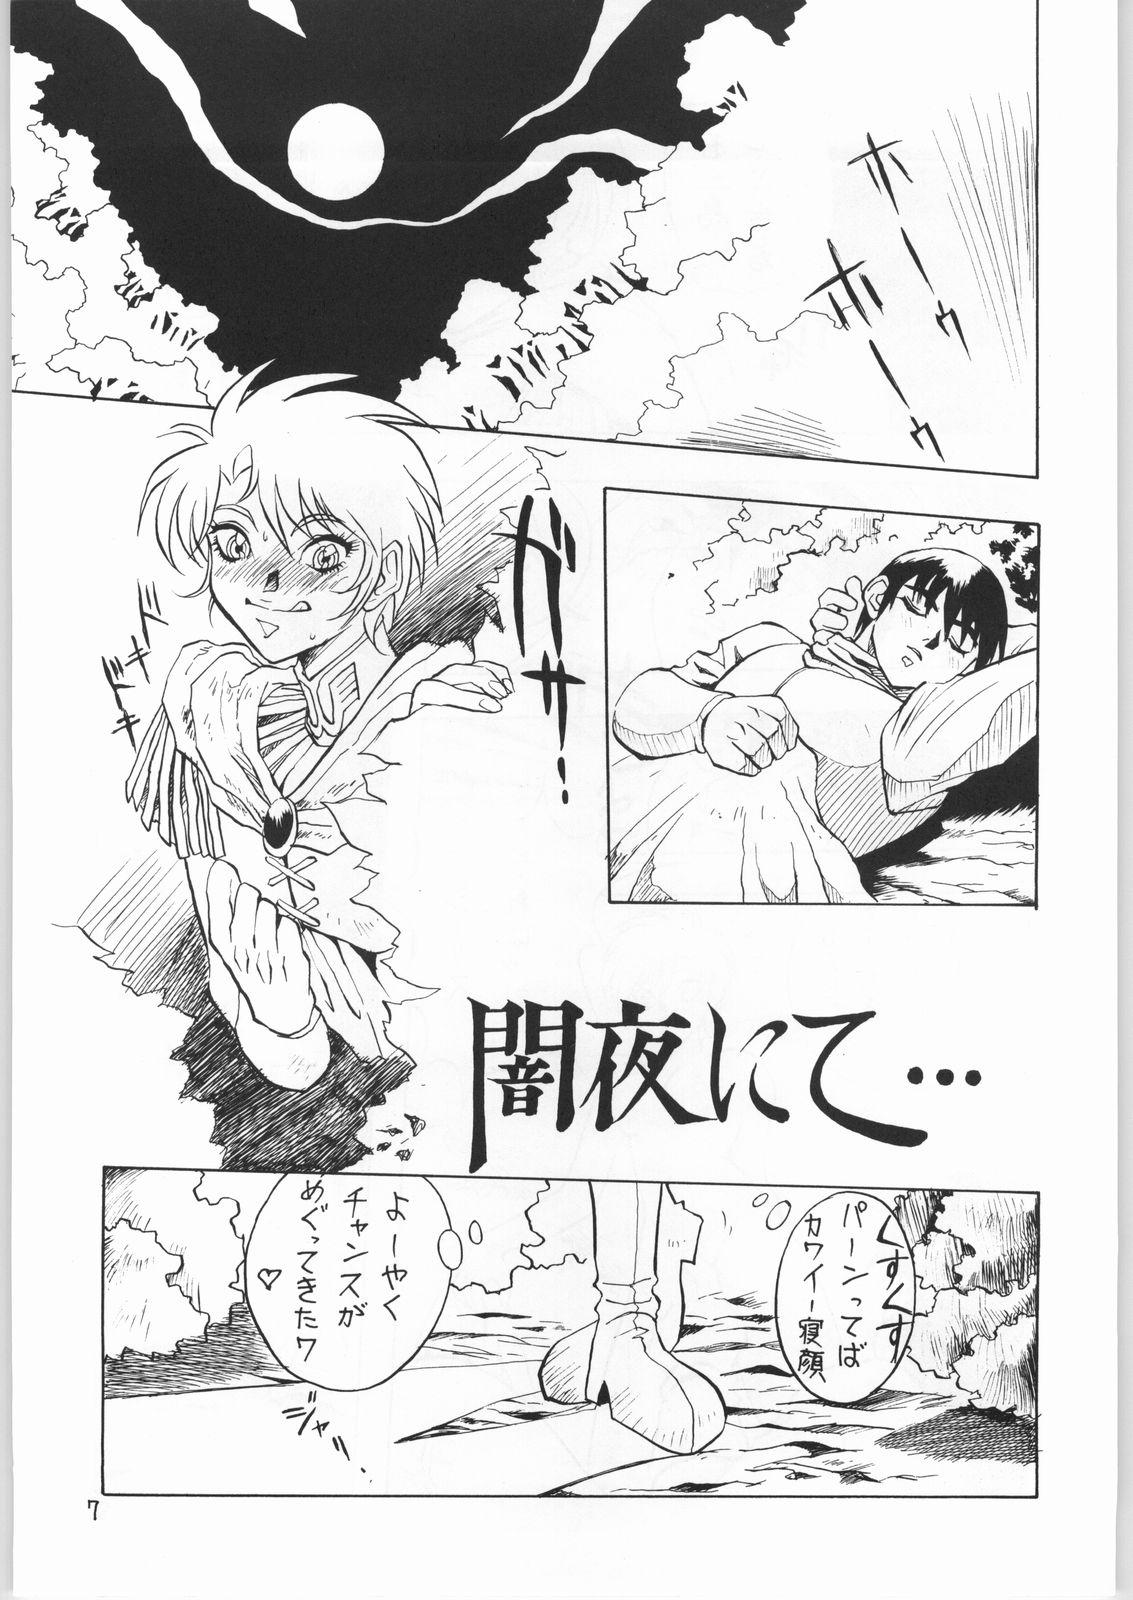 Throatfuck Heroic Dreams - Record of lodoss war Master - Page 6